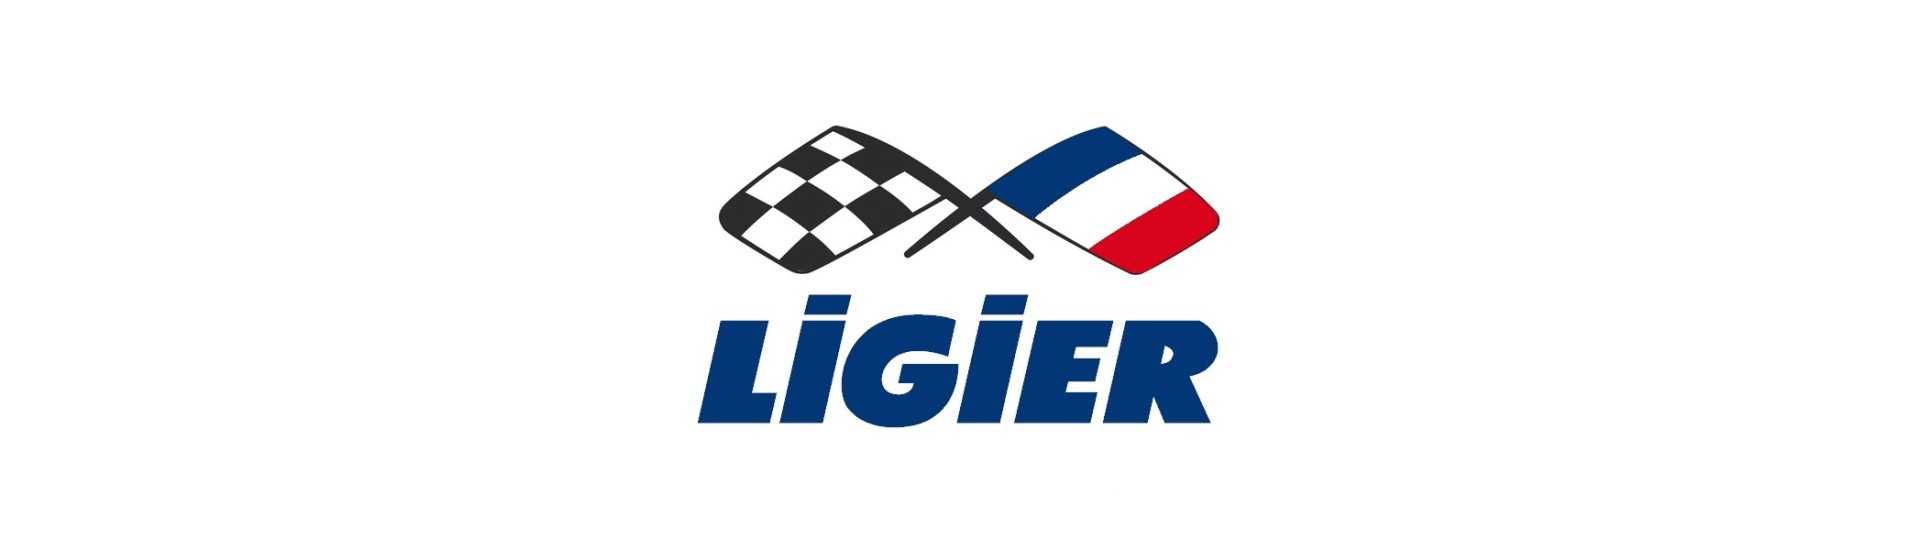 Best spare wheel for car without a license Ligier